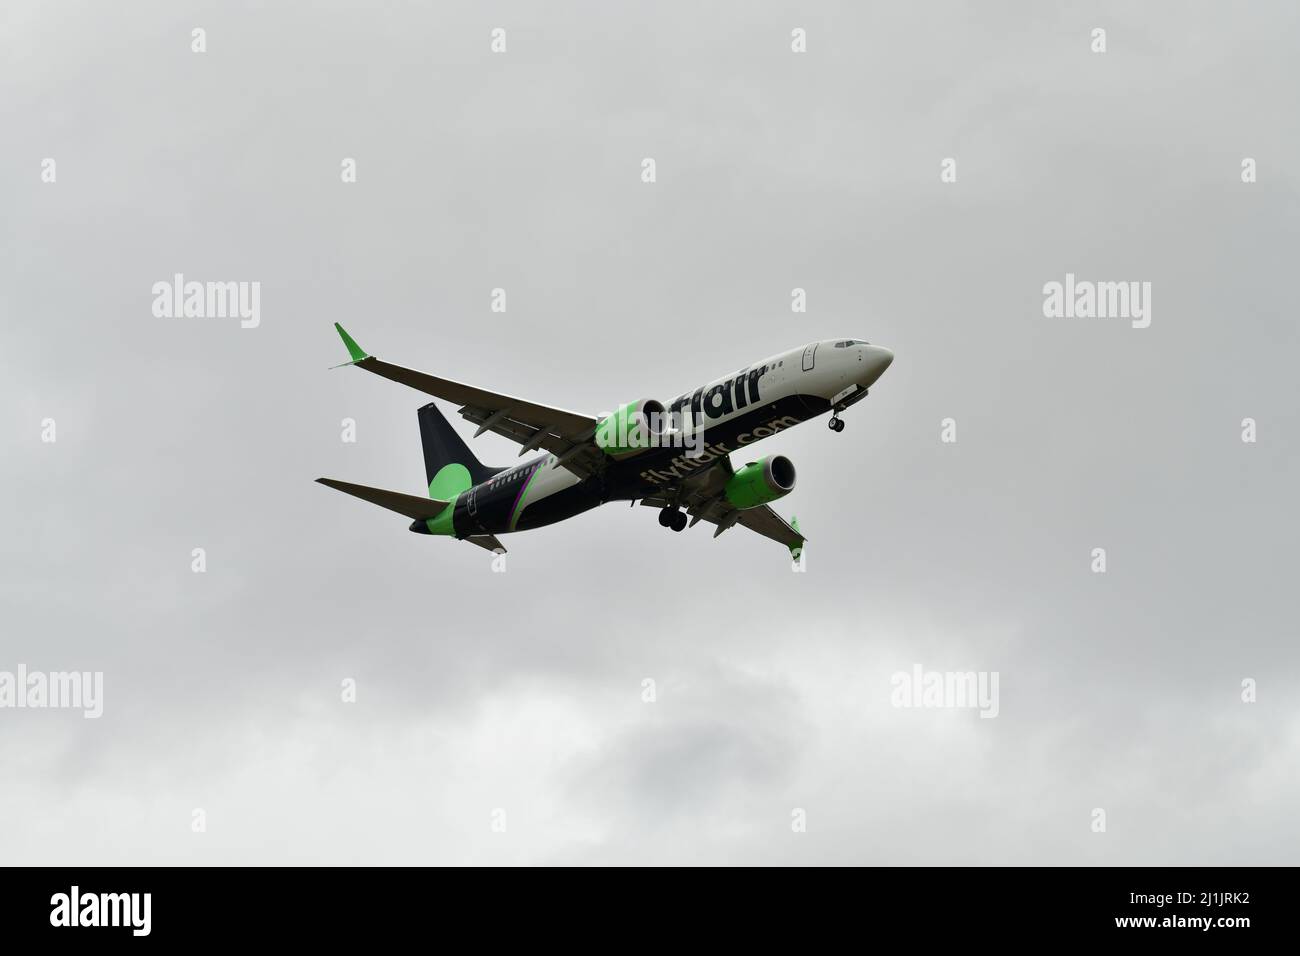 A passenger airplane lands at Pearson international airport in Toronto Canada in cloudy weather Stock Photo